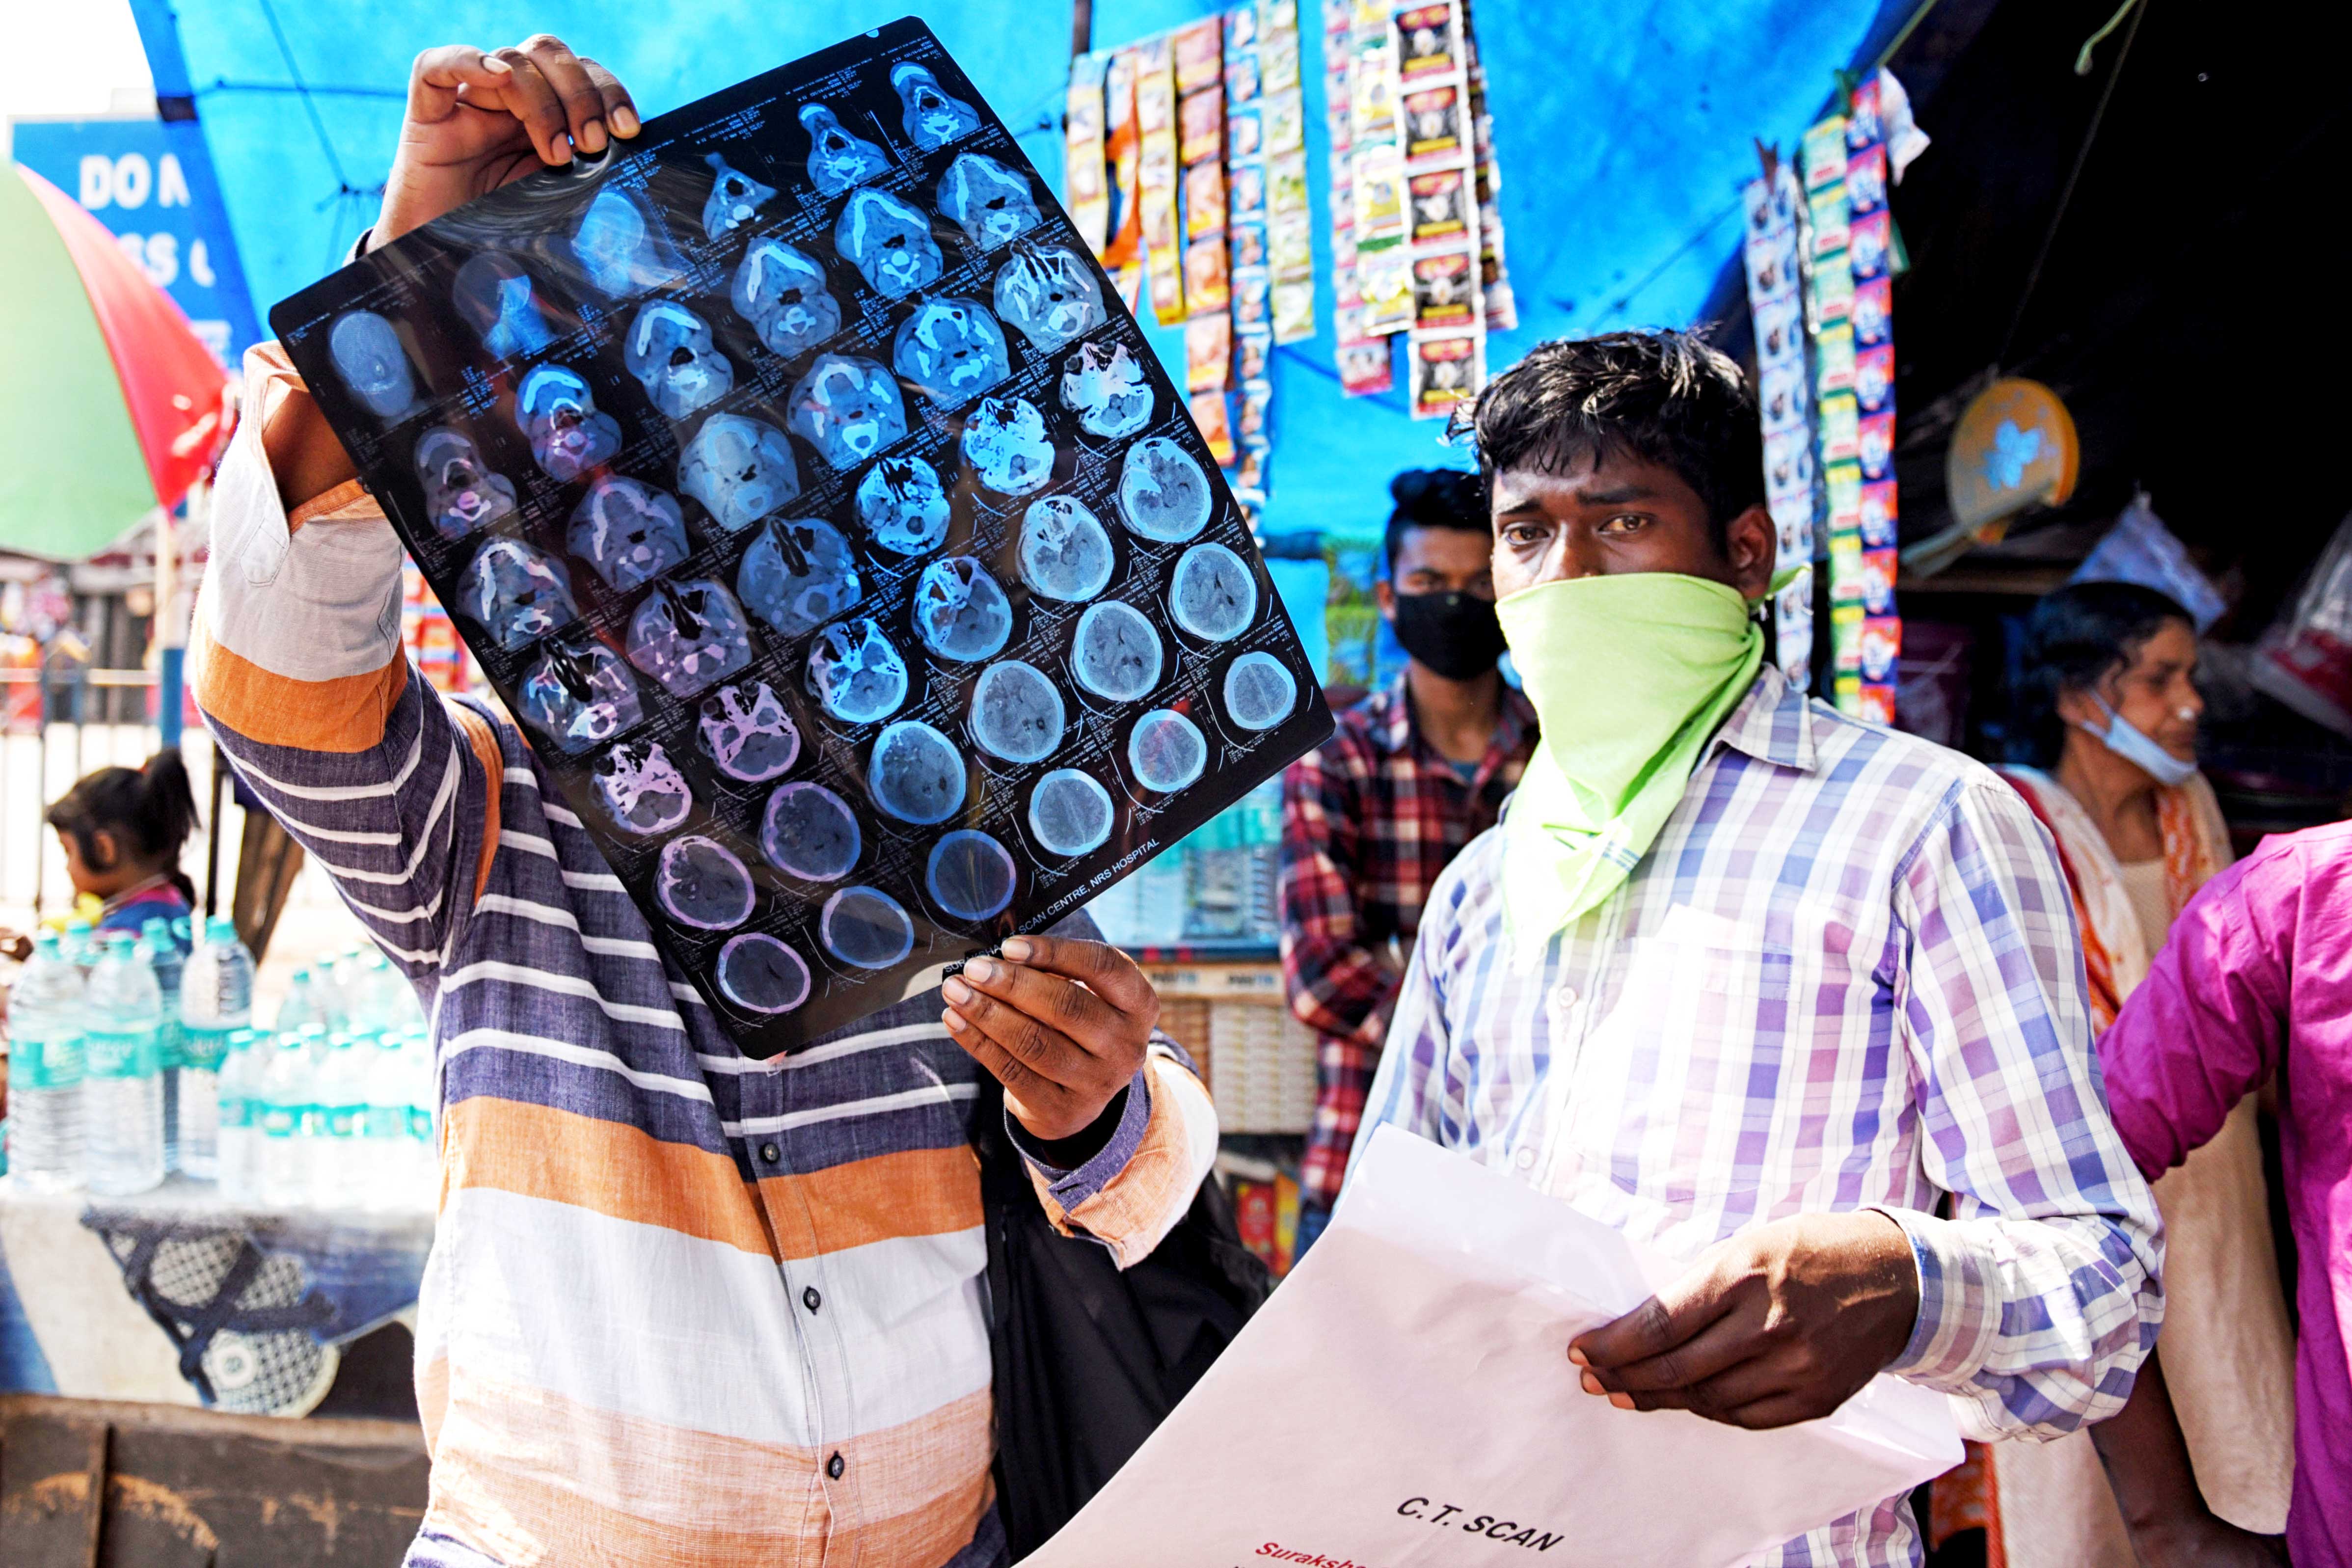 A patient with flu-like symptoms checks a CT scan in Kolkata, India.